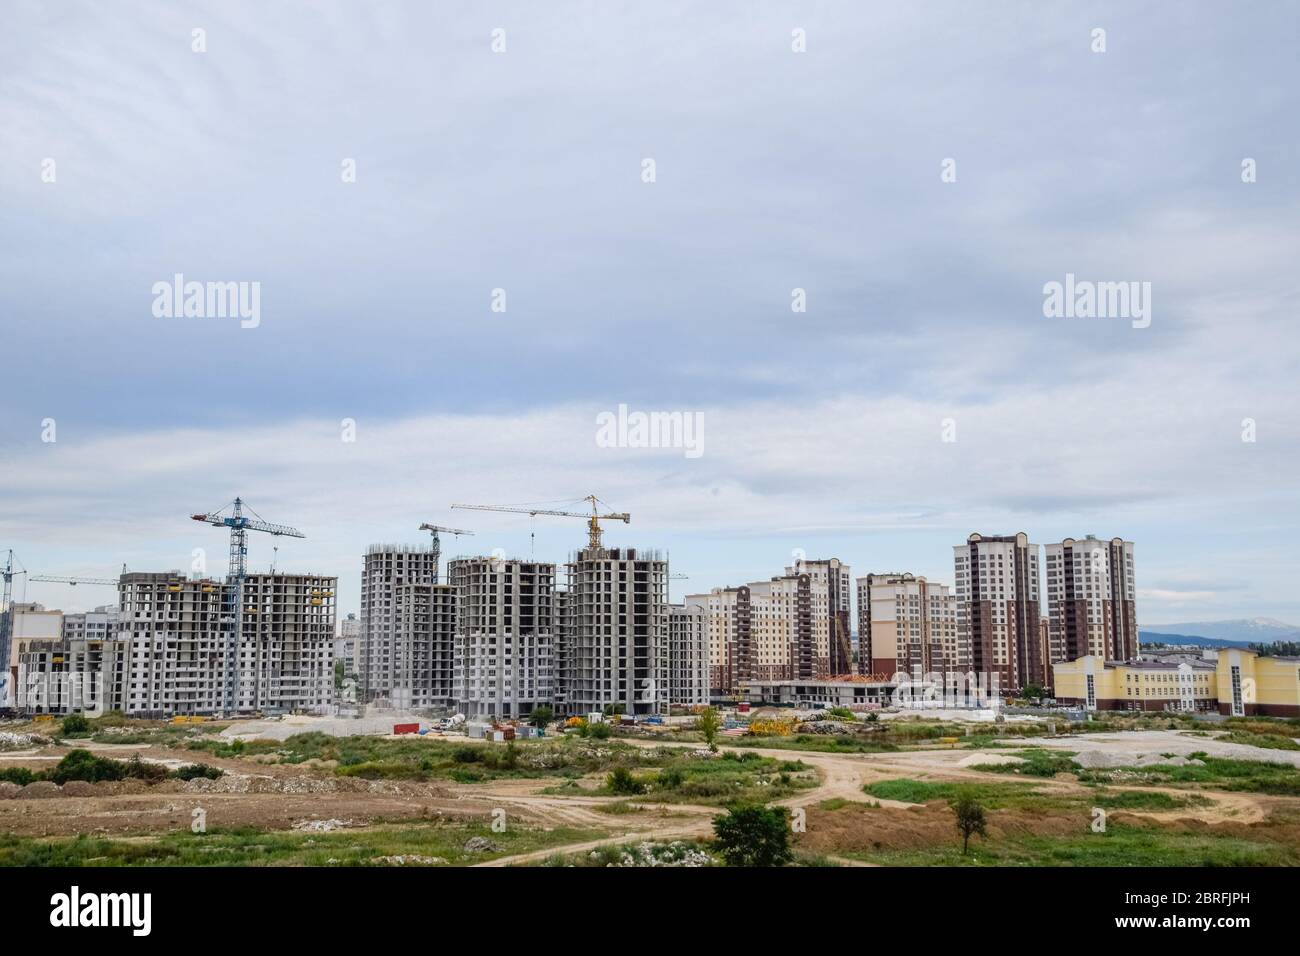 The construction of multi-storey residential buildings. Tower cranes at a construction site. Stock Photo